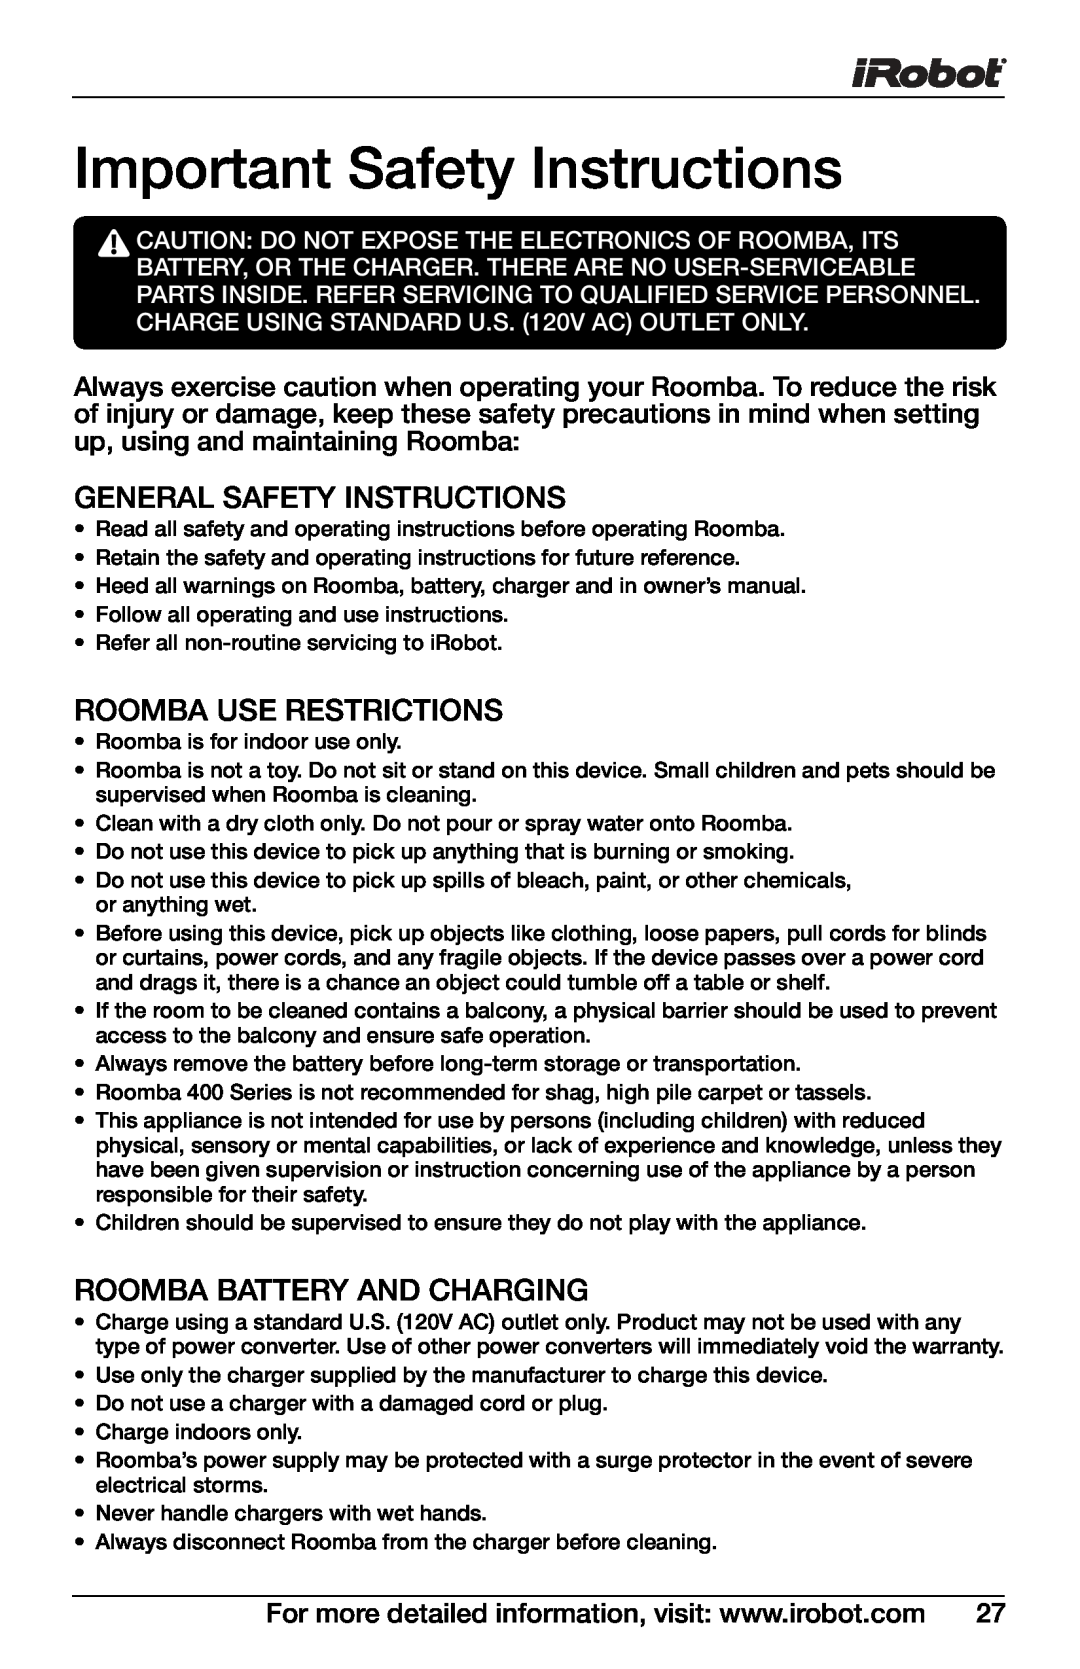 iRobot 4150, 400 owner manual Important Safety Instructions, General Safety Instructions, Roomba Use Restrictions 